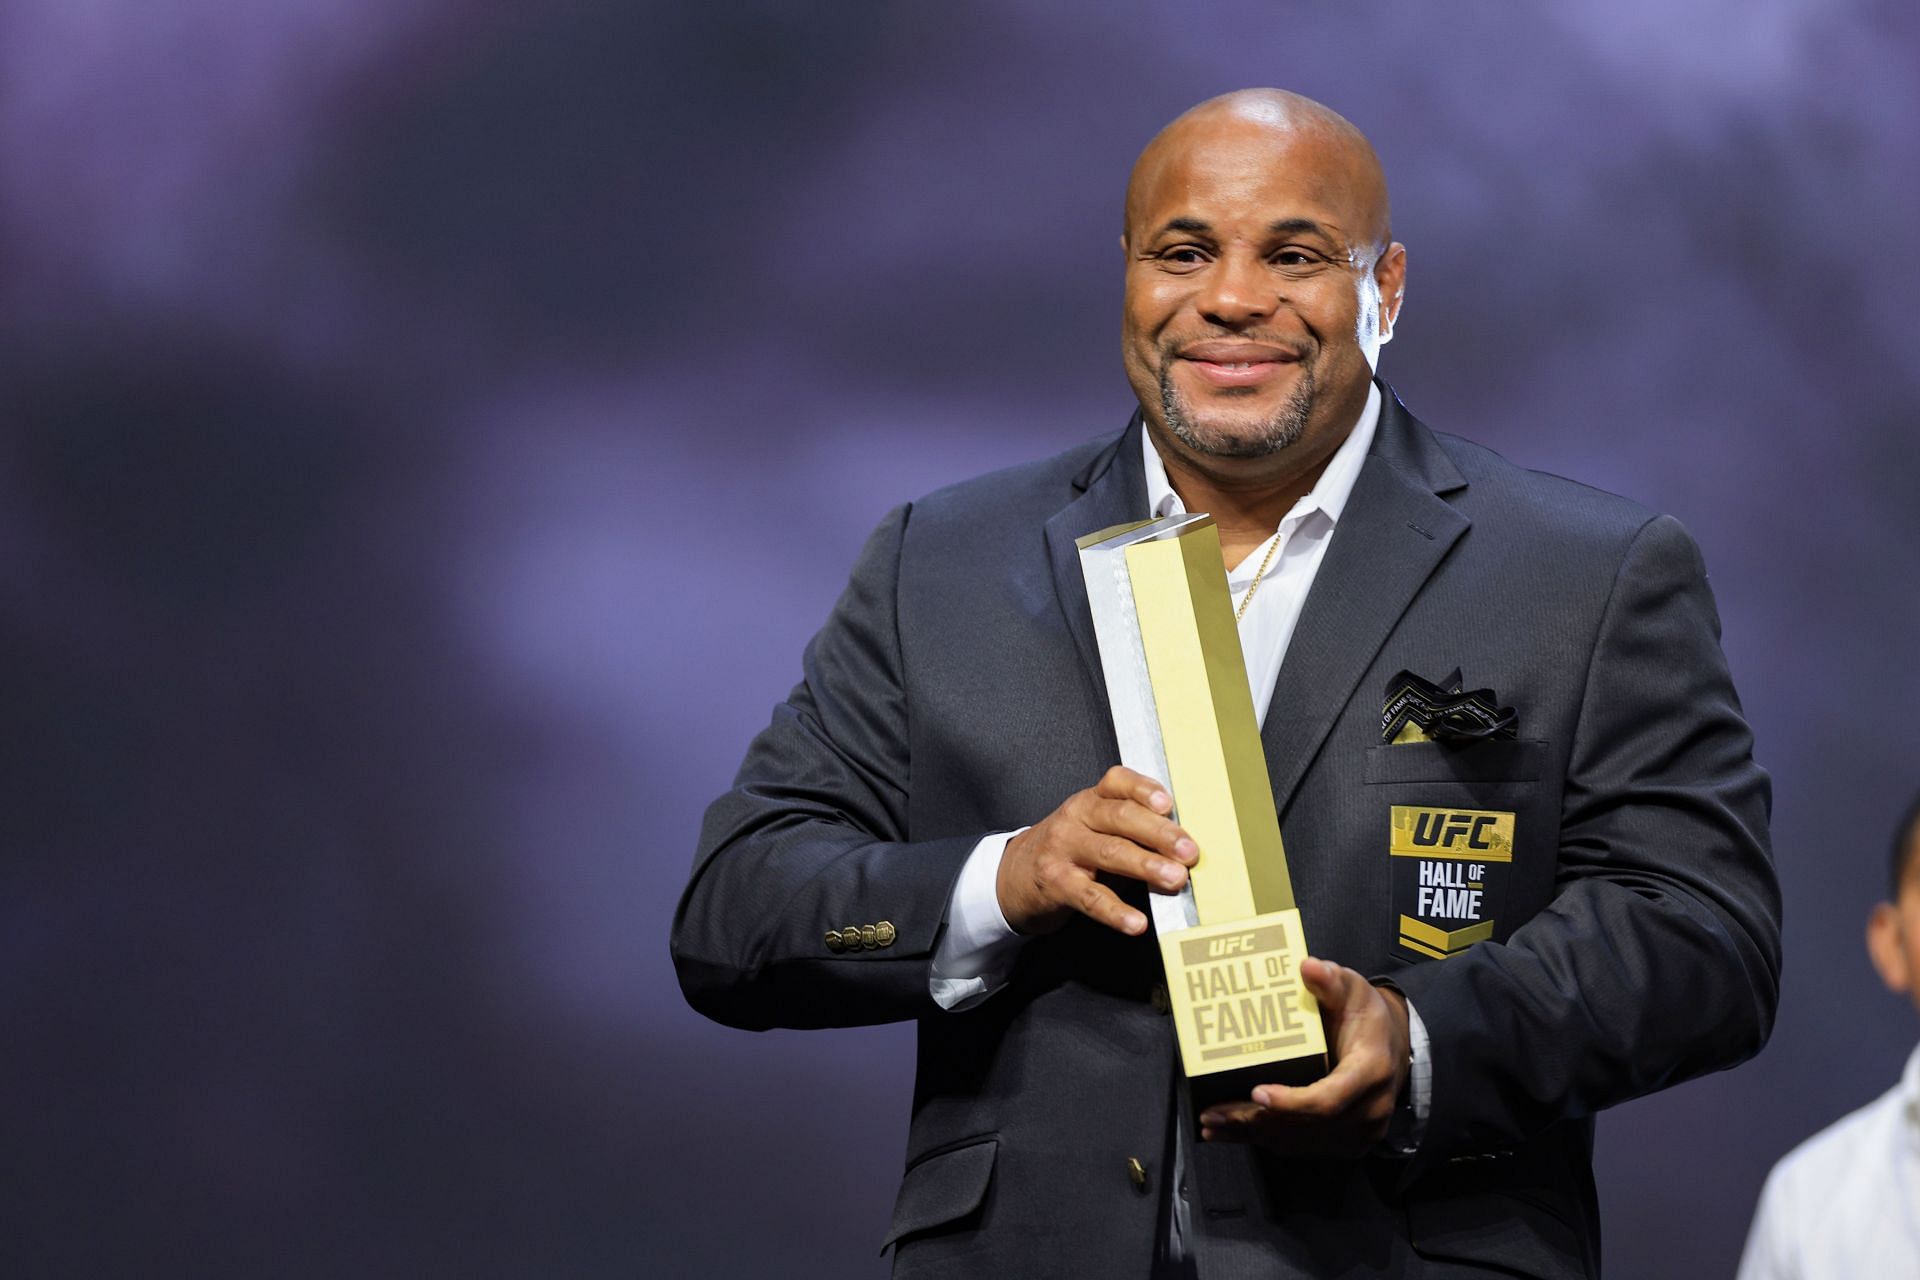 Daniel Cormier was recently inducted into the hall of fame